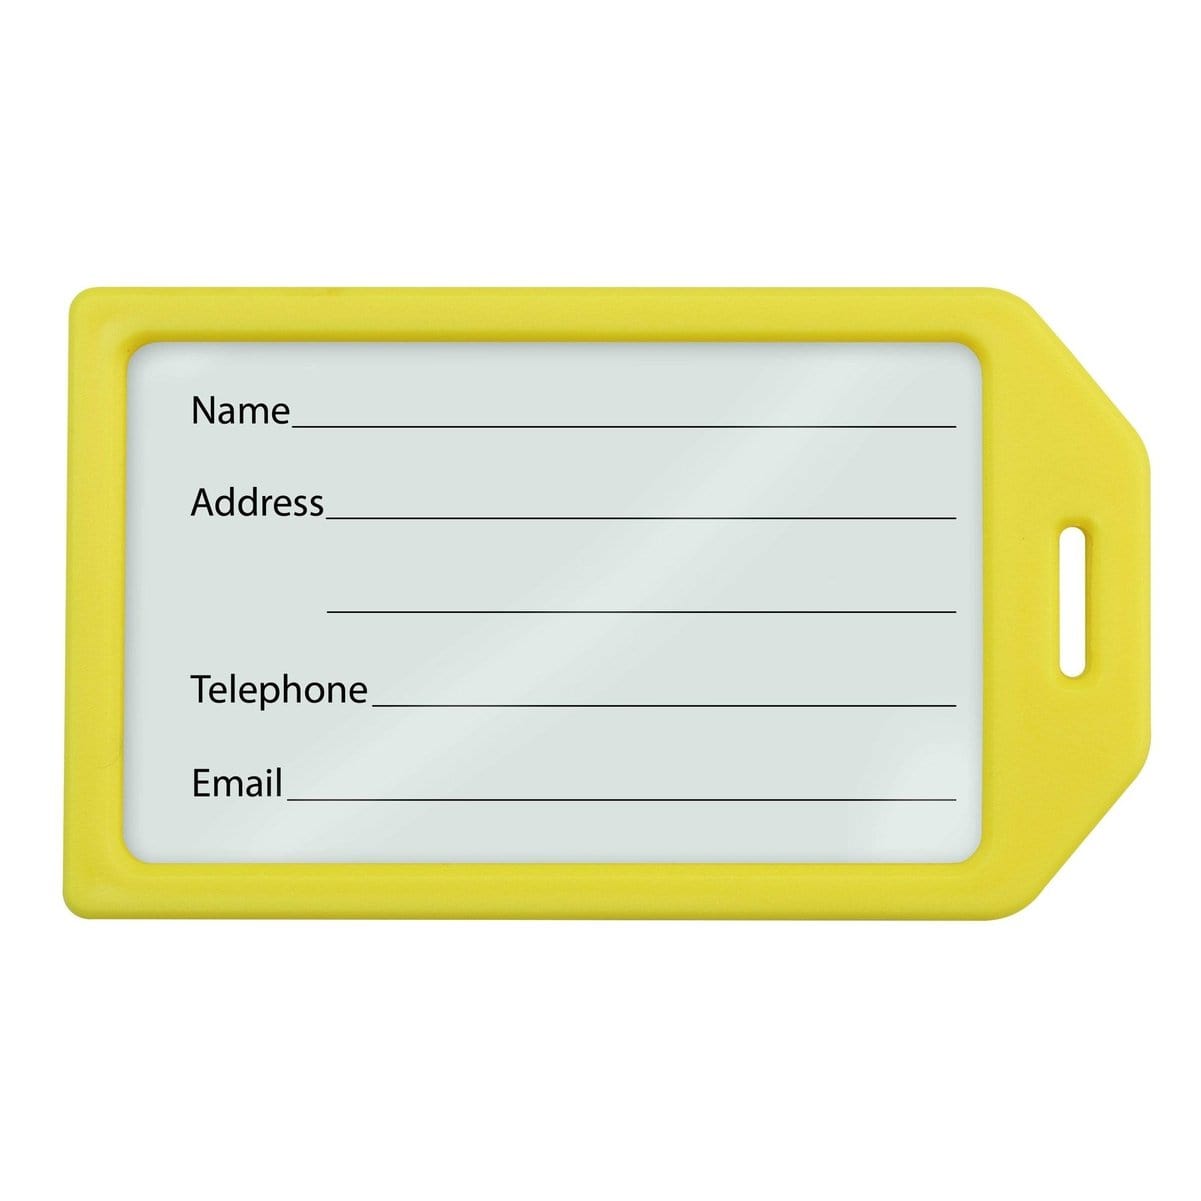 A Heavy Duty Luggage Tags with Plastic Loops Included - Window for Business Card or Included Insert (1840-620X) with blank lines for Name, Address, Telephone, and Email. This plastic luggage tag holder ensures all your essential details are secure and easily visible.